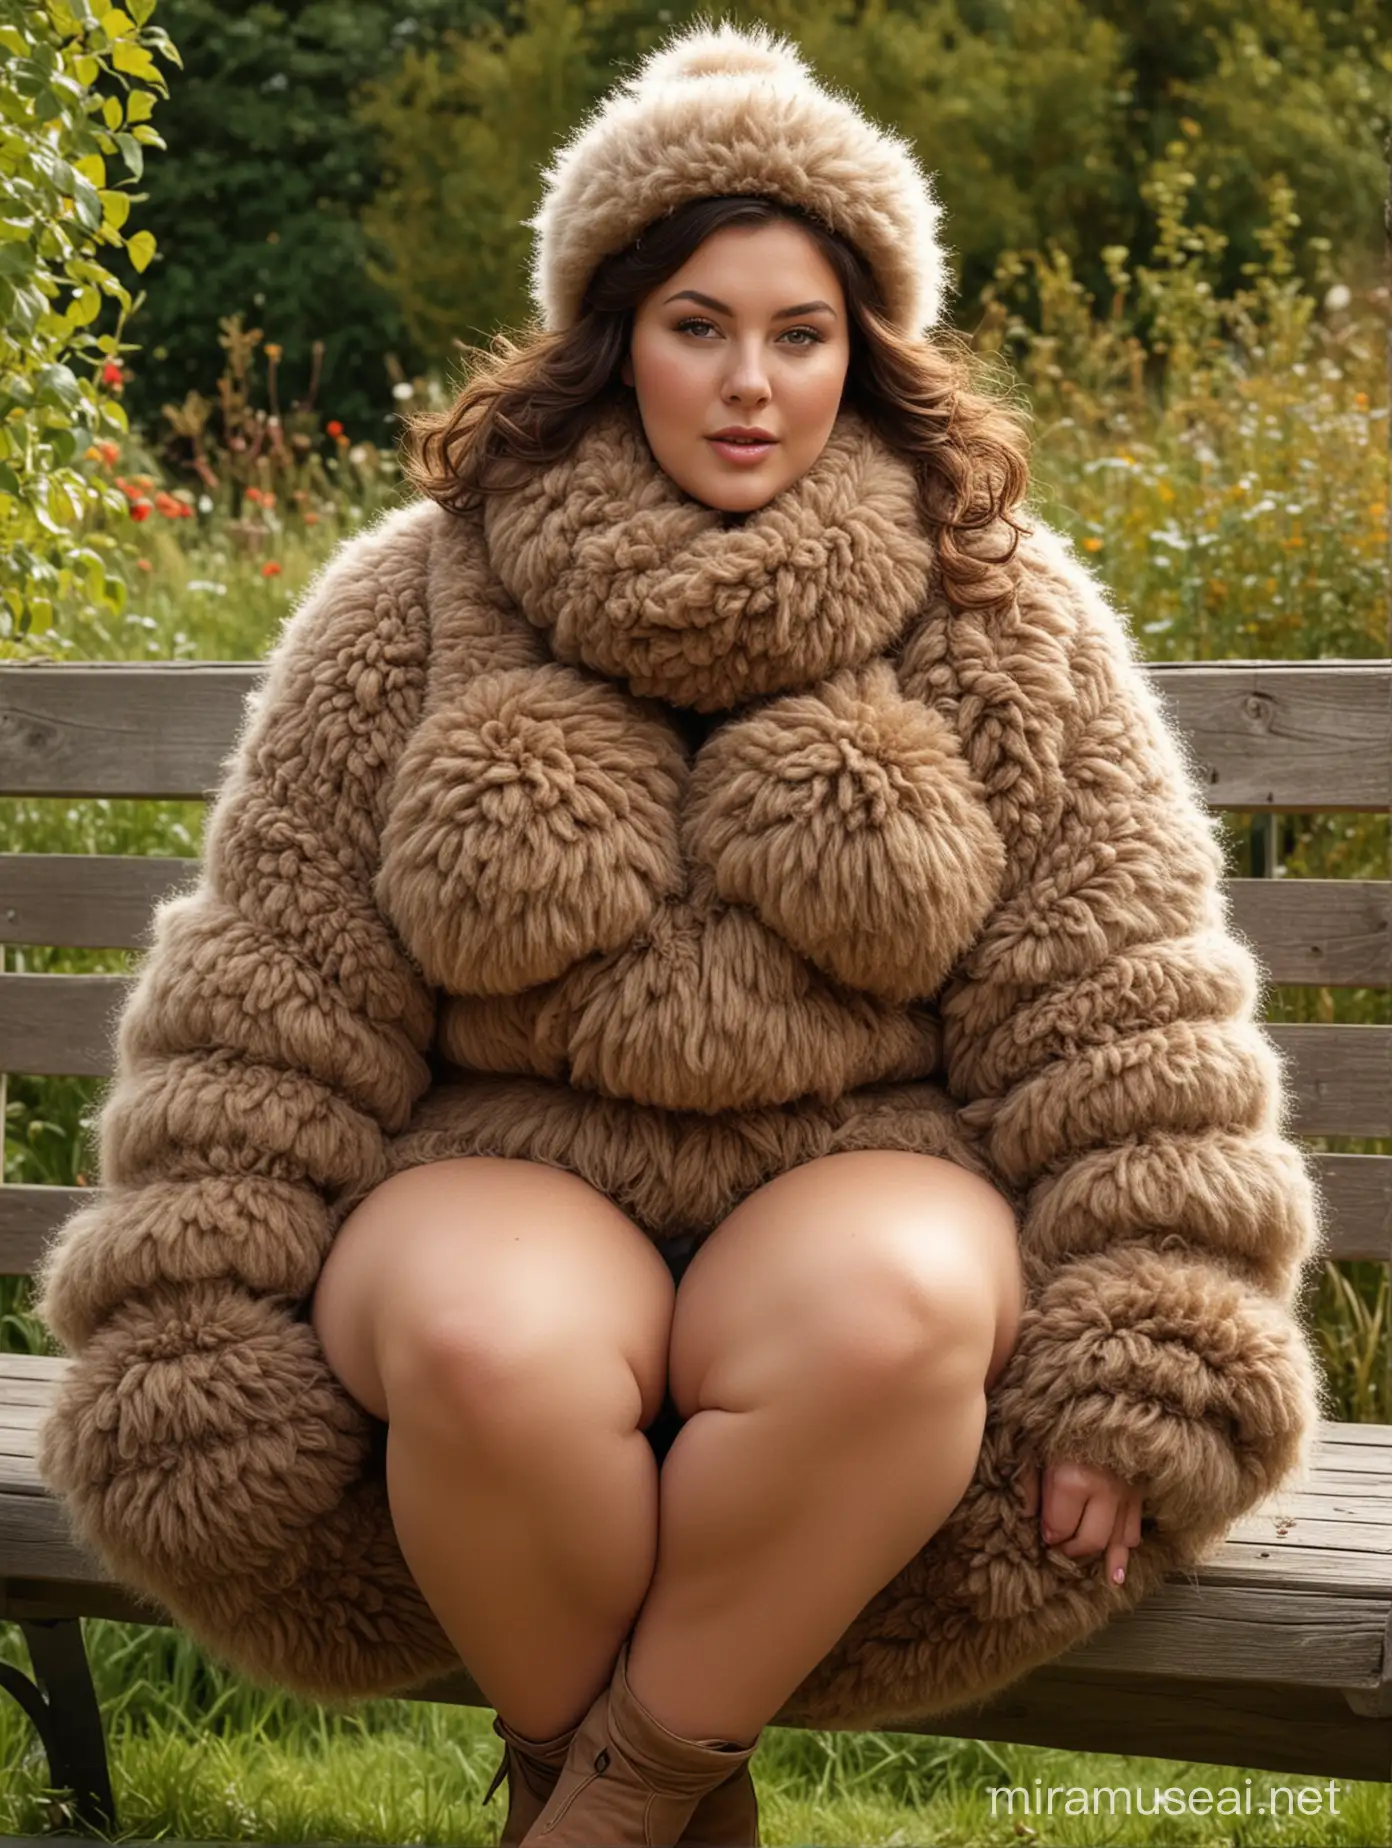 brunette plus-size curvy woman with huge fat outsize boobs sitting on a garden bench, wearing a huge extremely thick mulit-layered, extremely heavy thick fuzzy wool outfit (full body suit, sweater, dress, scarf, hat etc.)